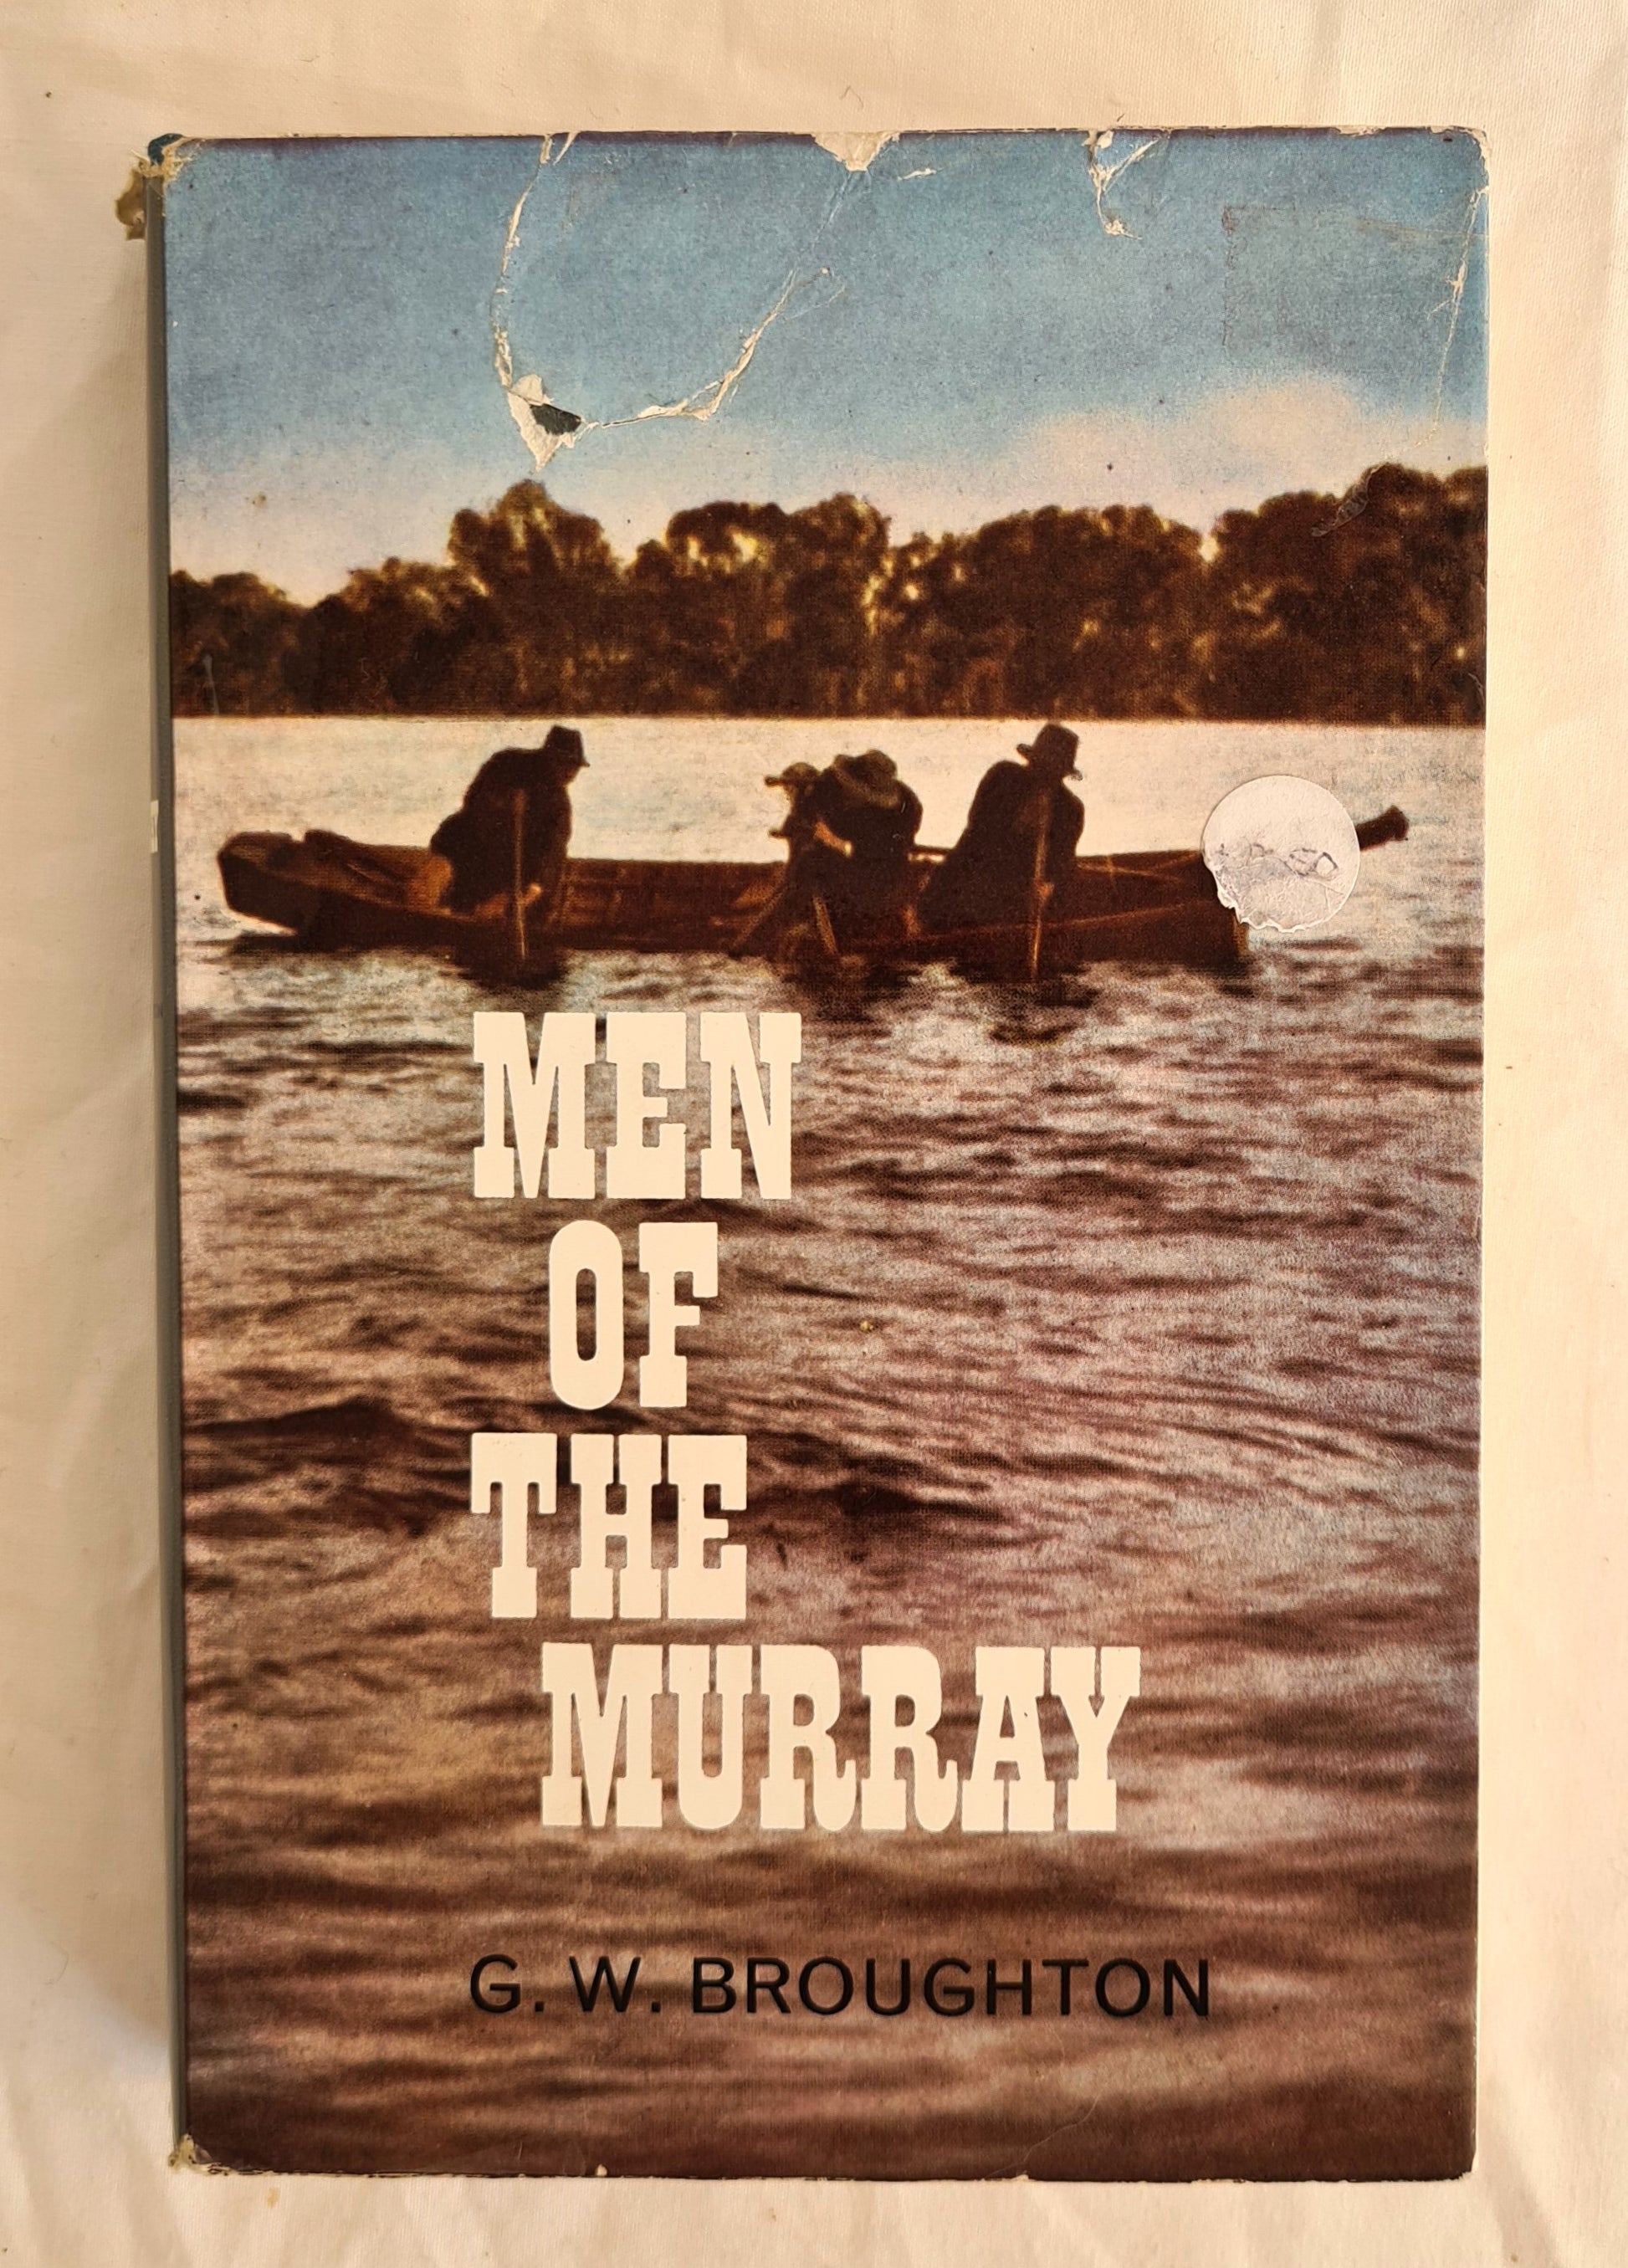 Men of the Murray  A Surveyor’s Story  by G. W. Broughton